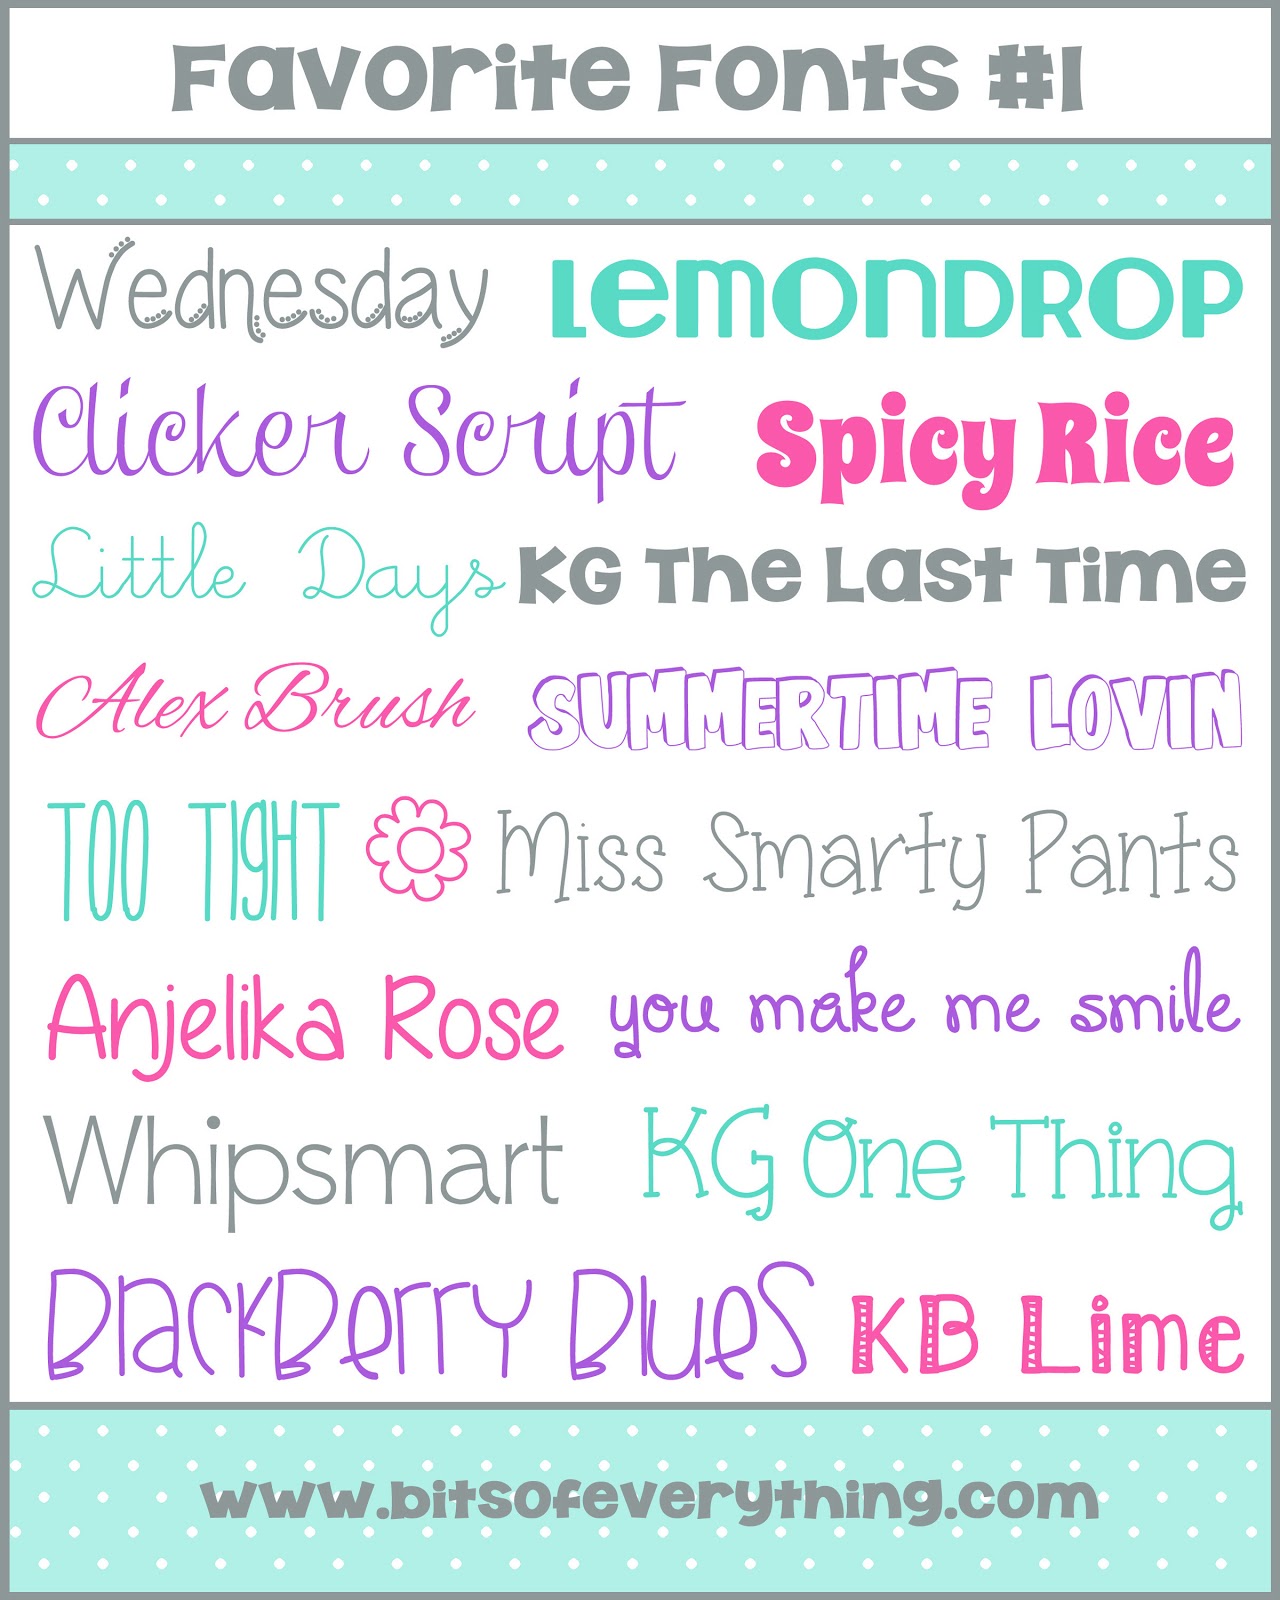 Cute Font Collection #1 | Bits of Everything